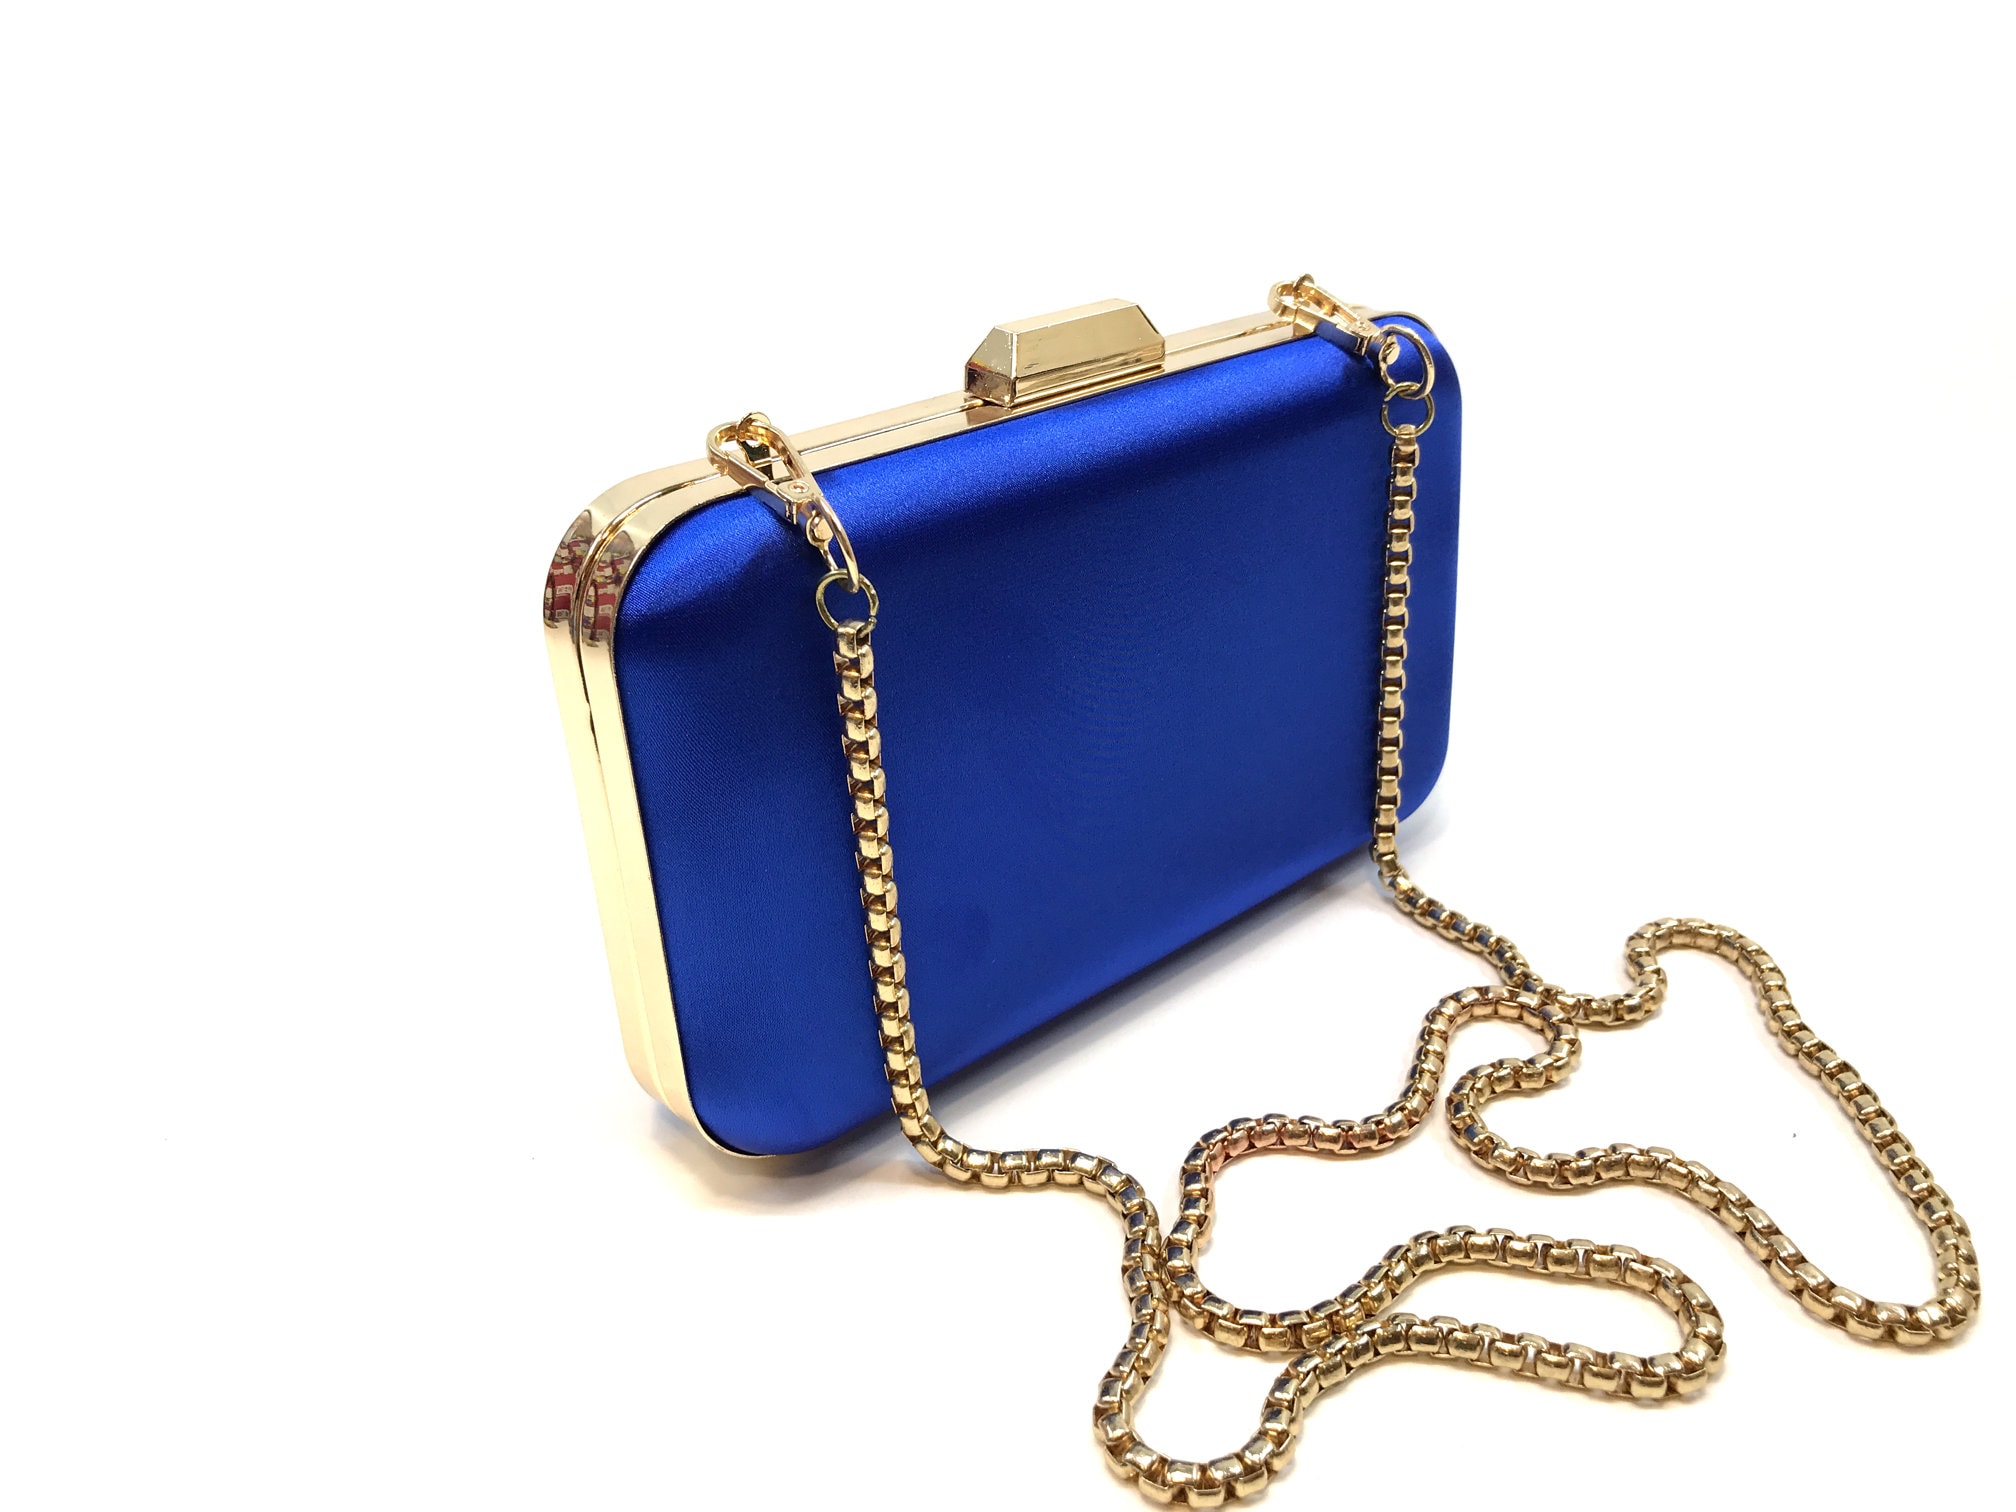 Royal Blue Madras Personalized Clutch - Clutches & Evening Bags